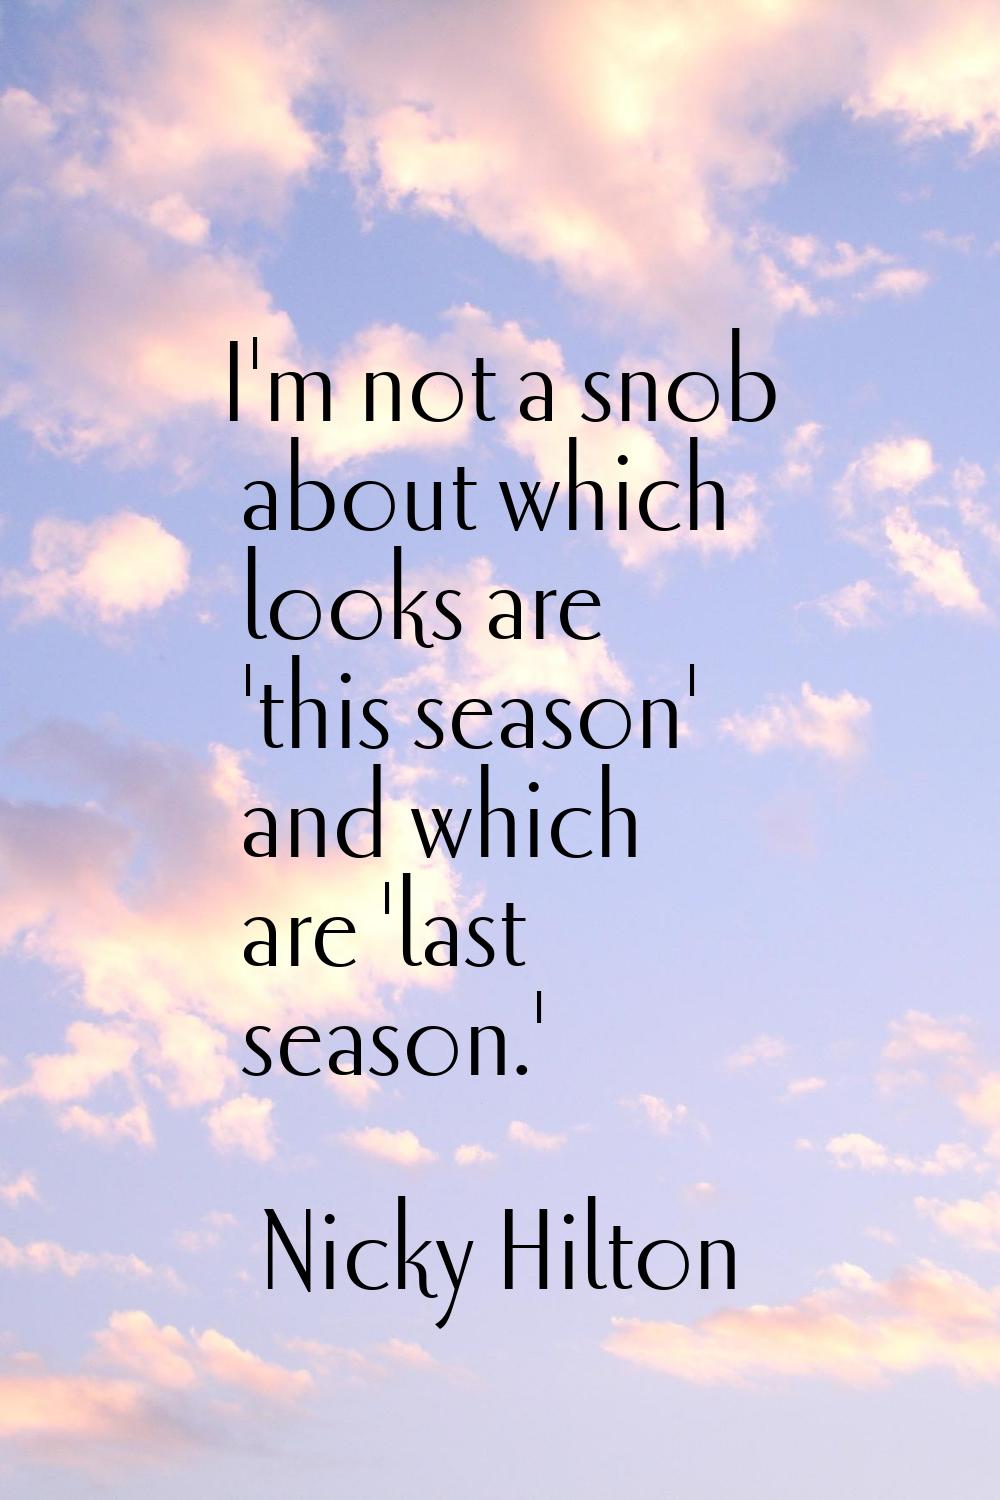 I'm not a snob about which looks are 'this season' and which are 'last season.'